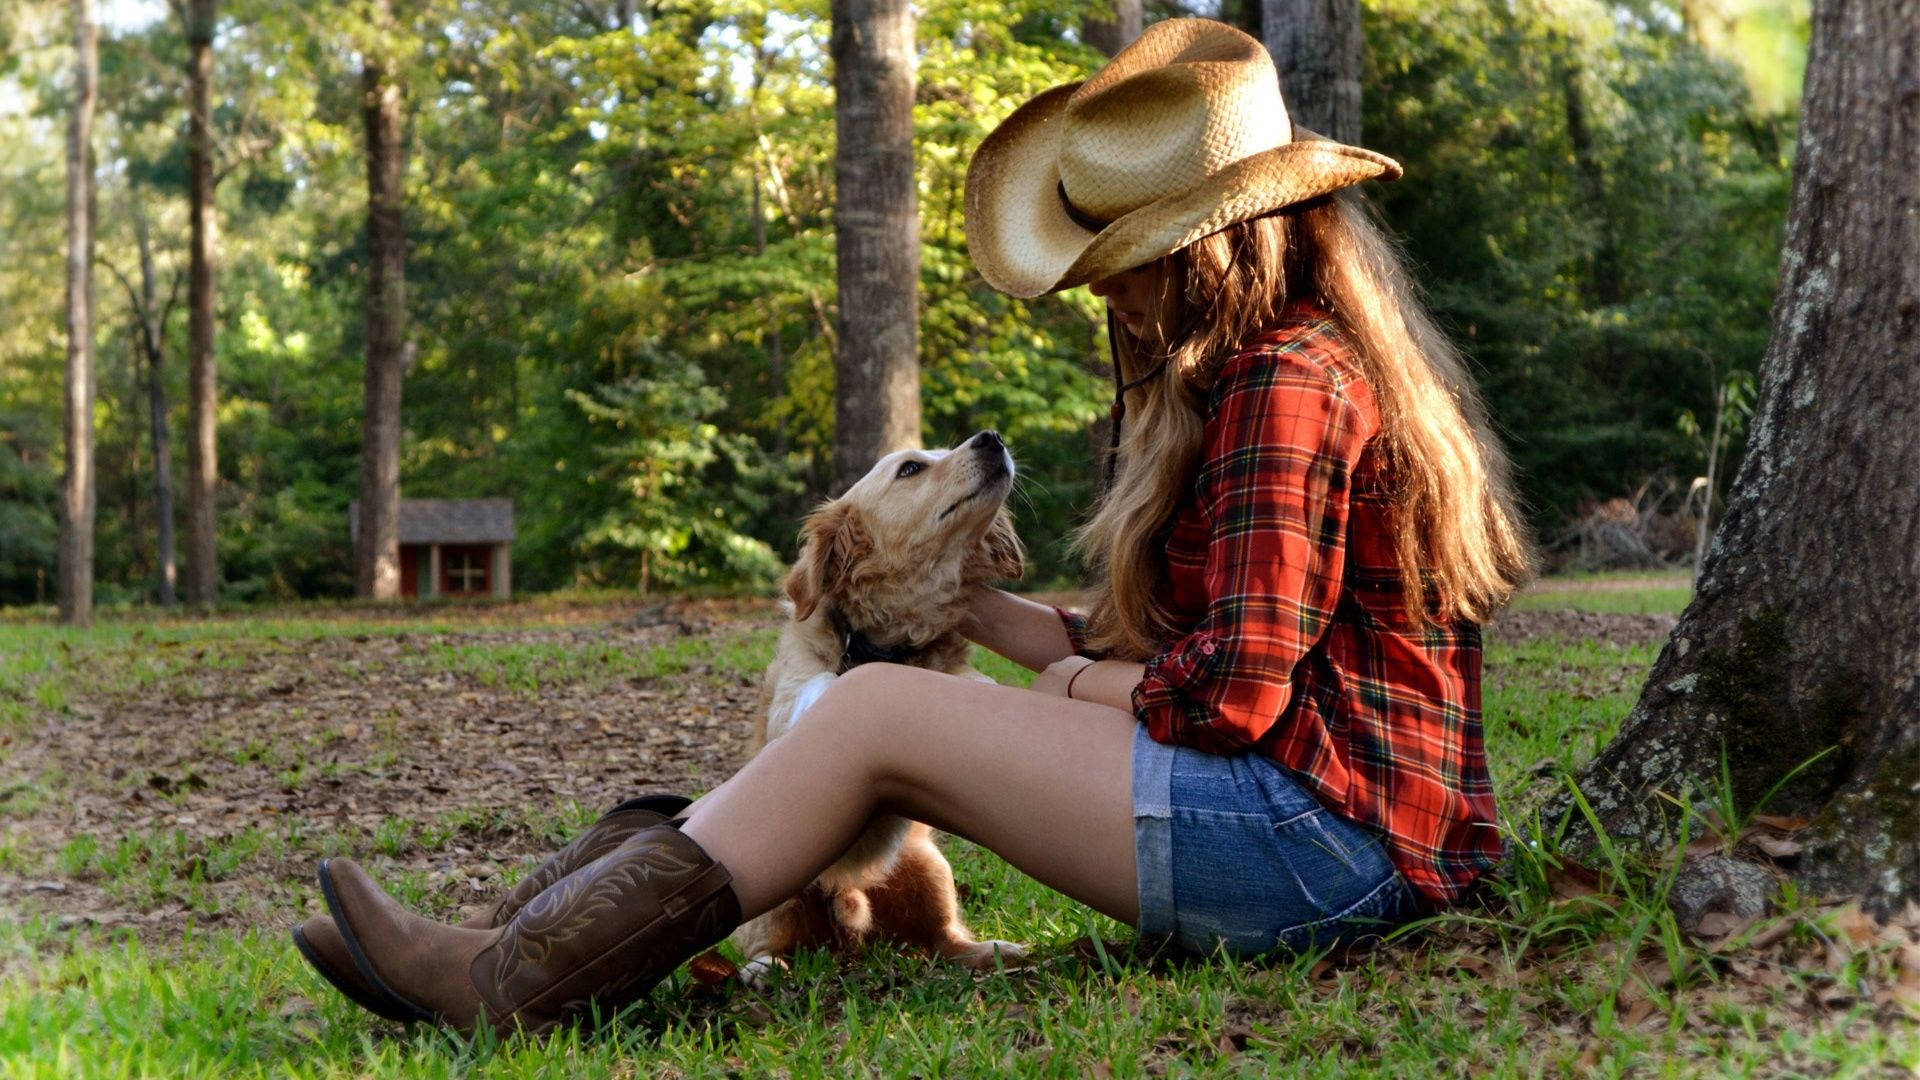 Sitting Cowgirl With A Dog Wallpaper